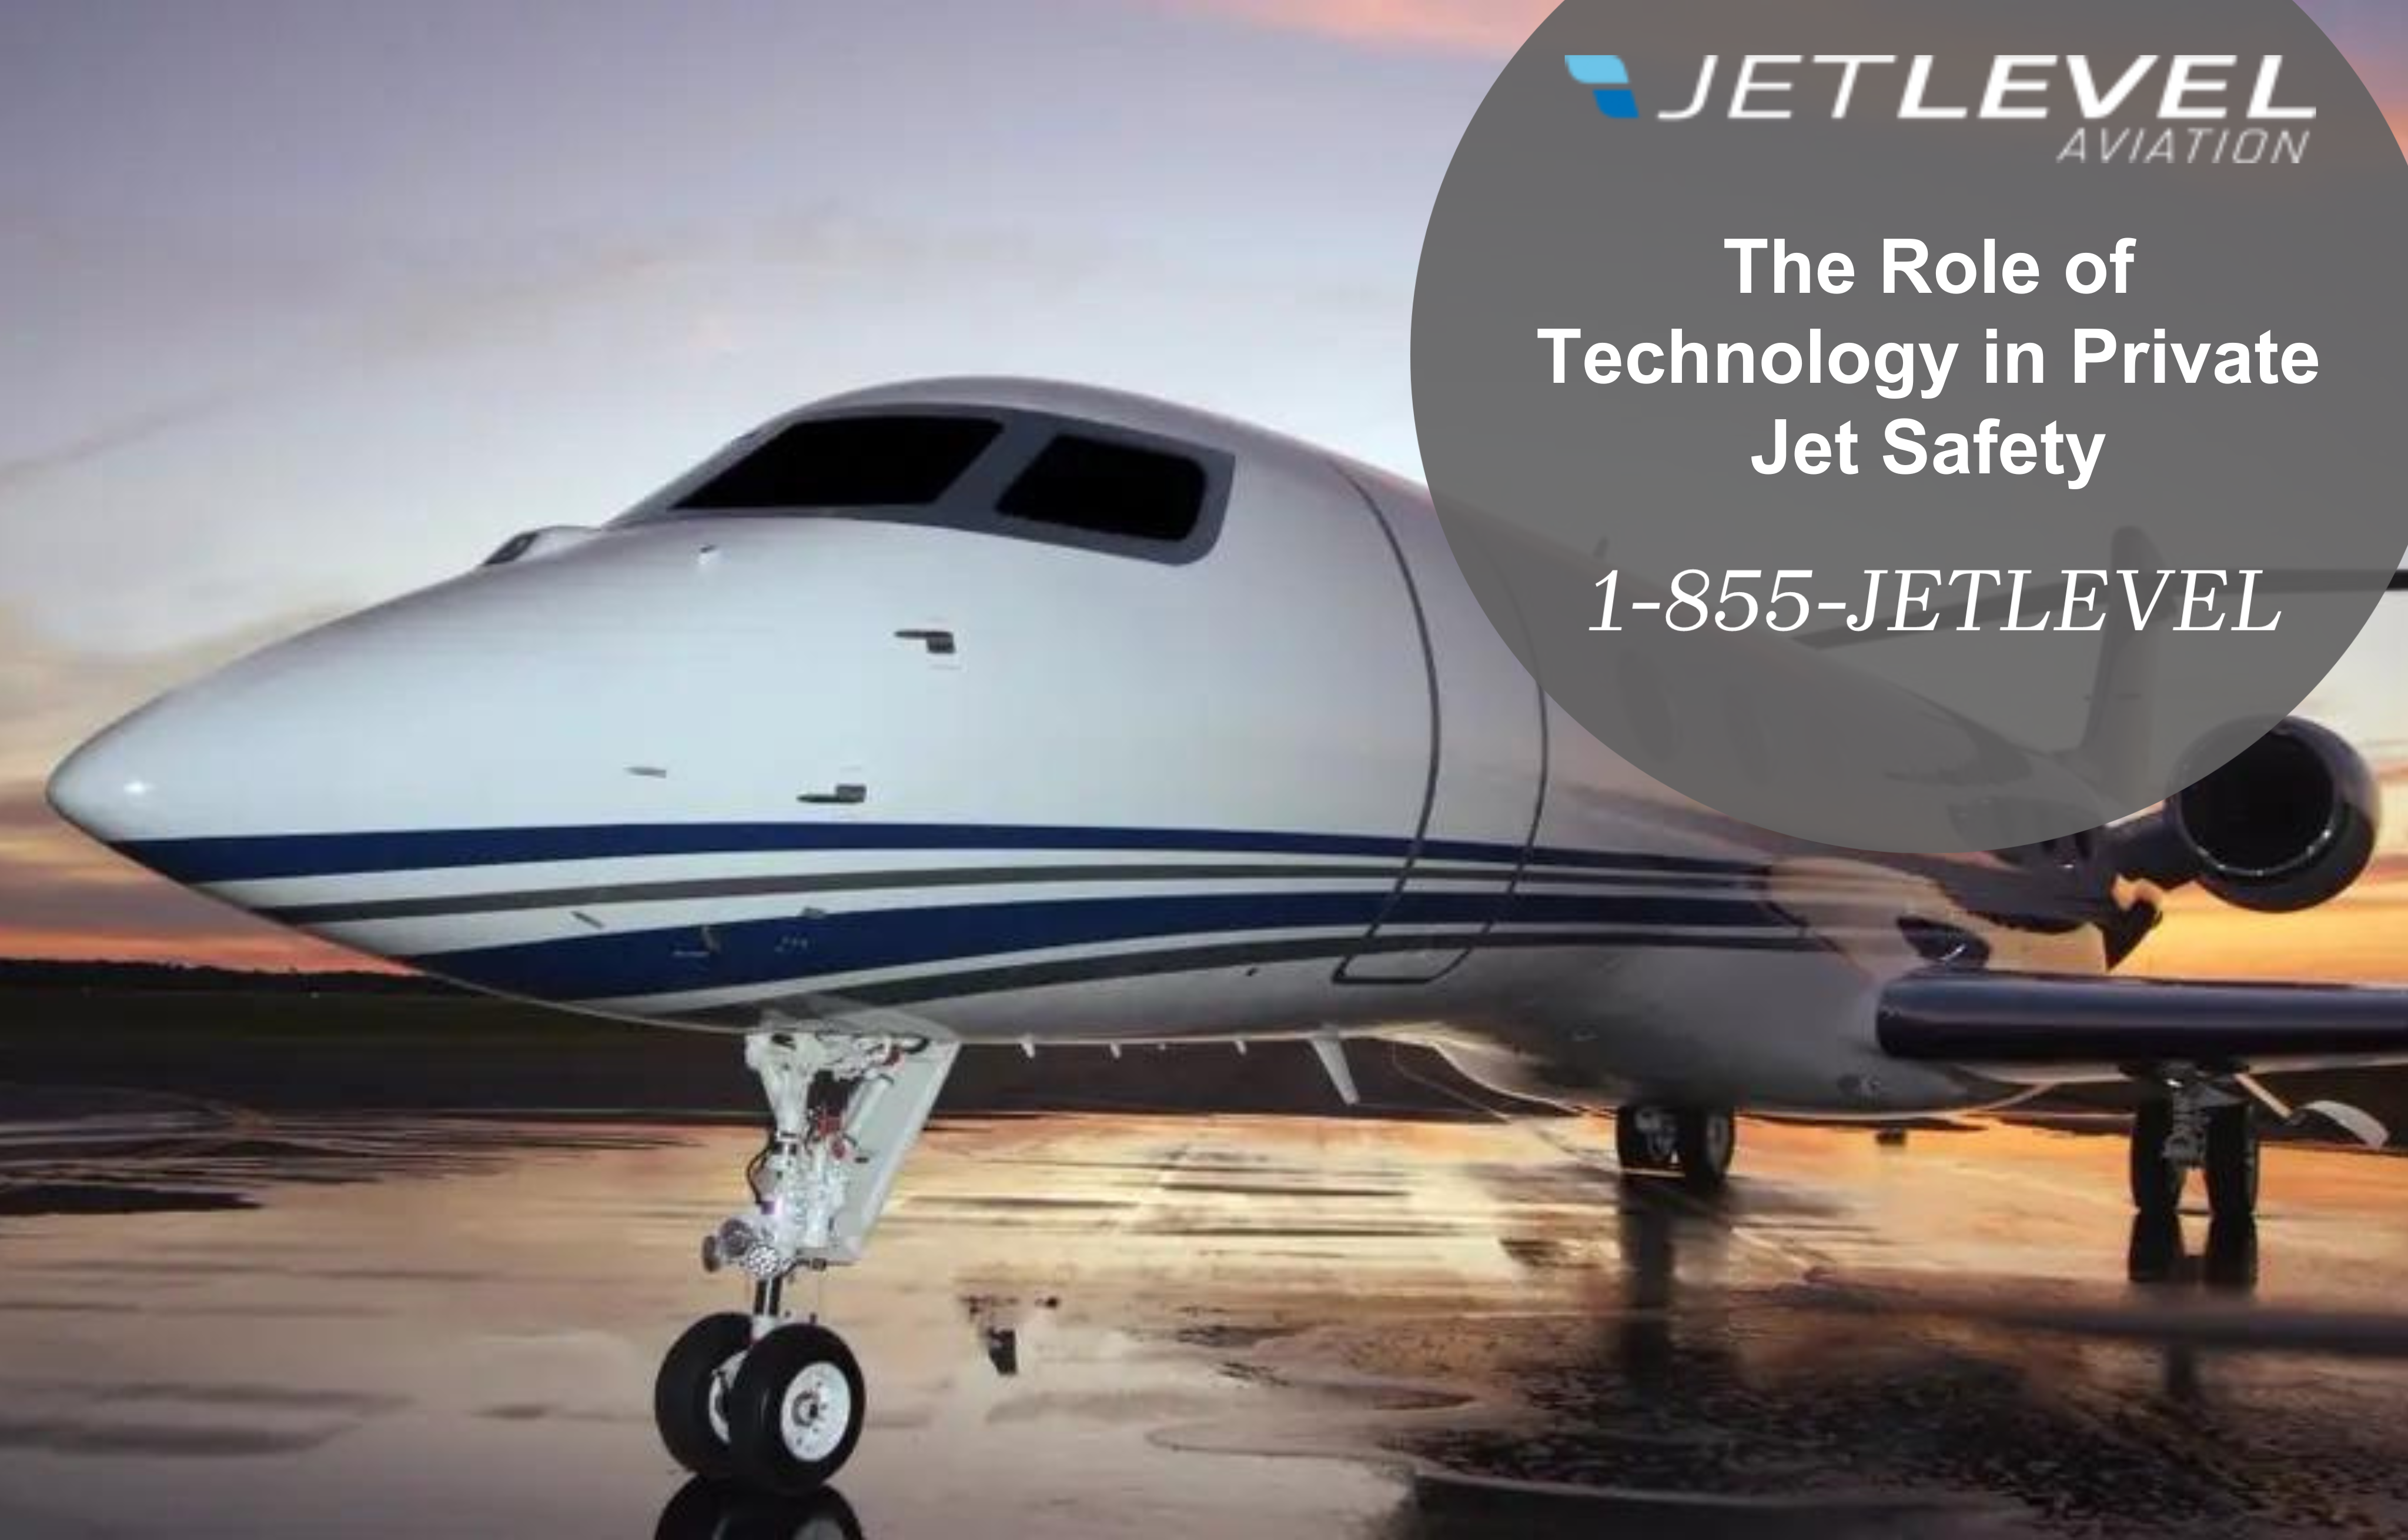 The Role of Technology in Private Jet Safety